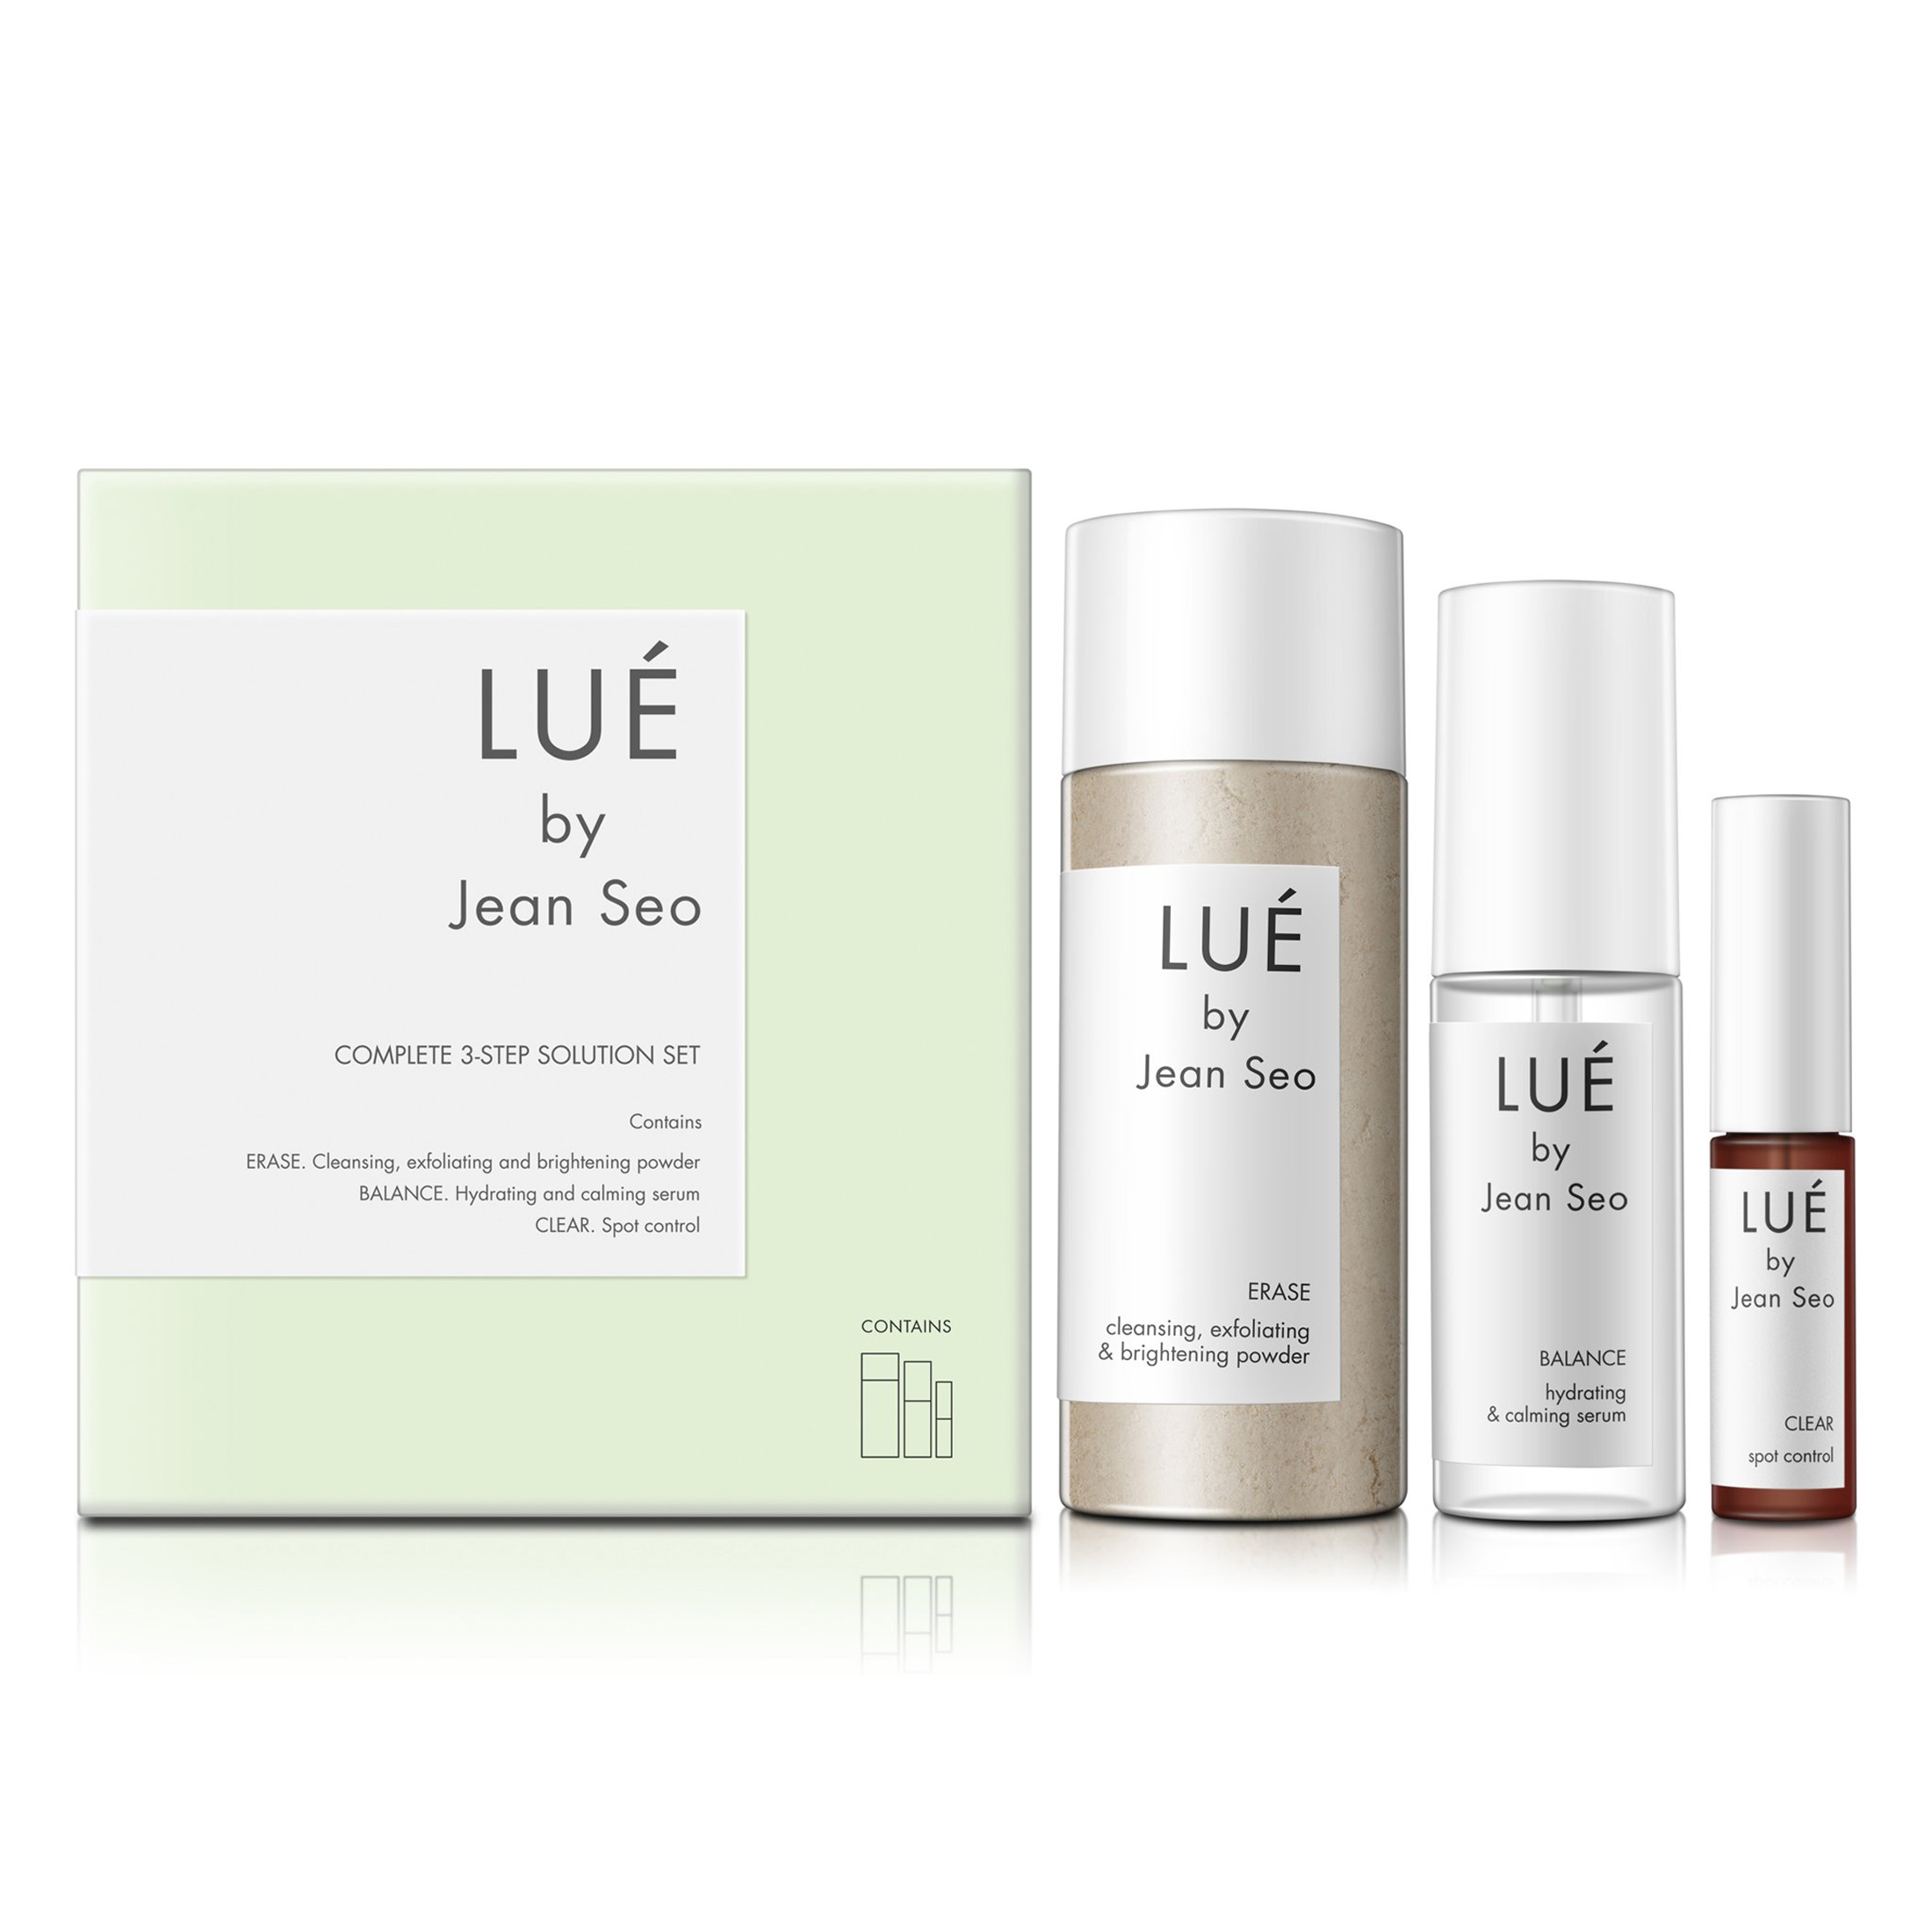 Lue by Jean Seo Skin Solution Set, Cleanse, Moisturize, Control, All Skin Types, Organic & Non-Gmo, Acne & Irritations - image 4 of 5